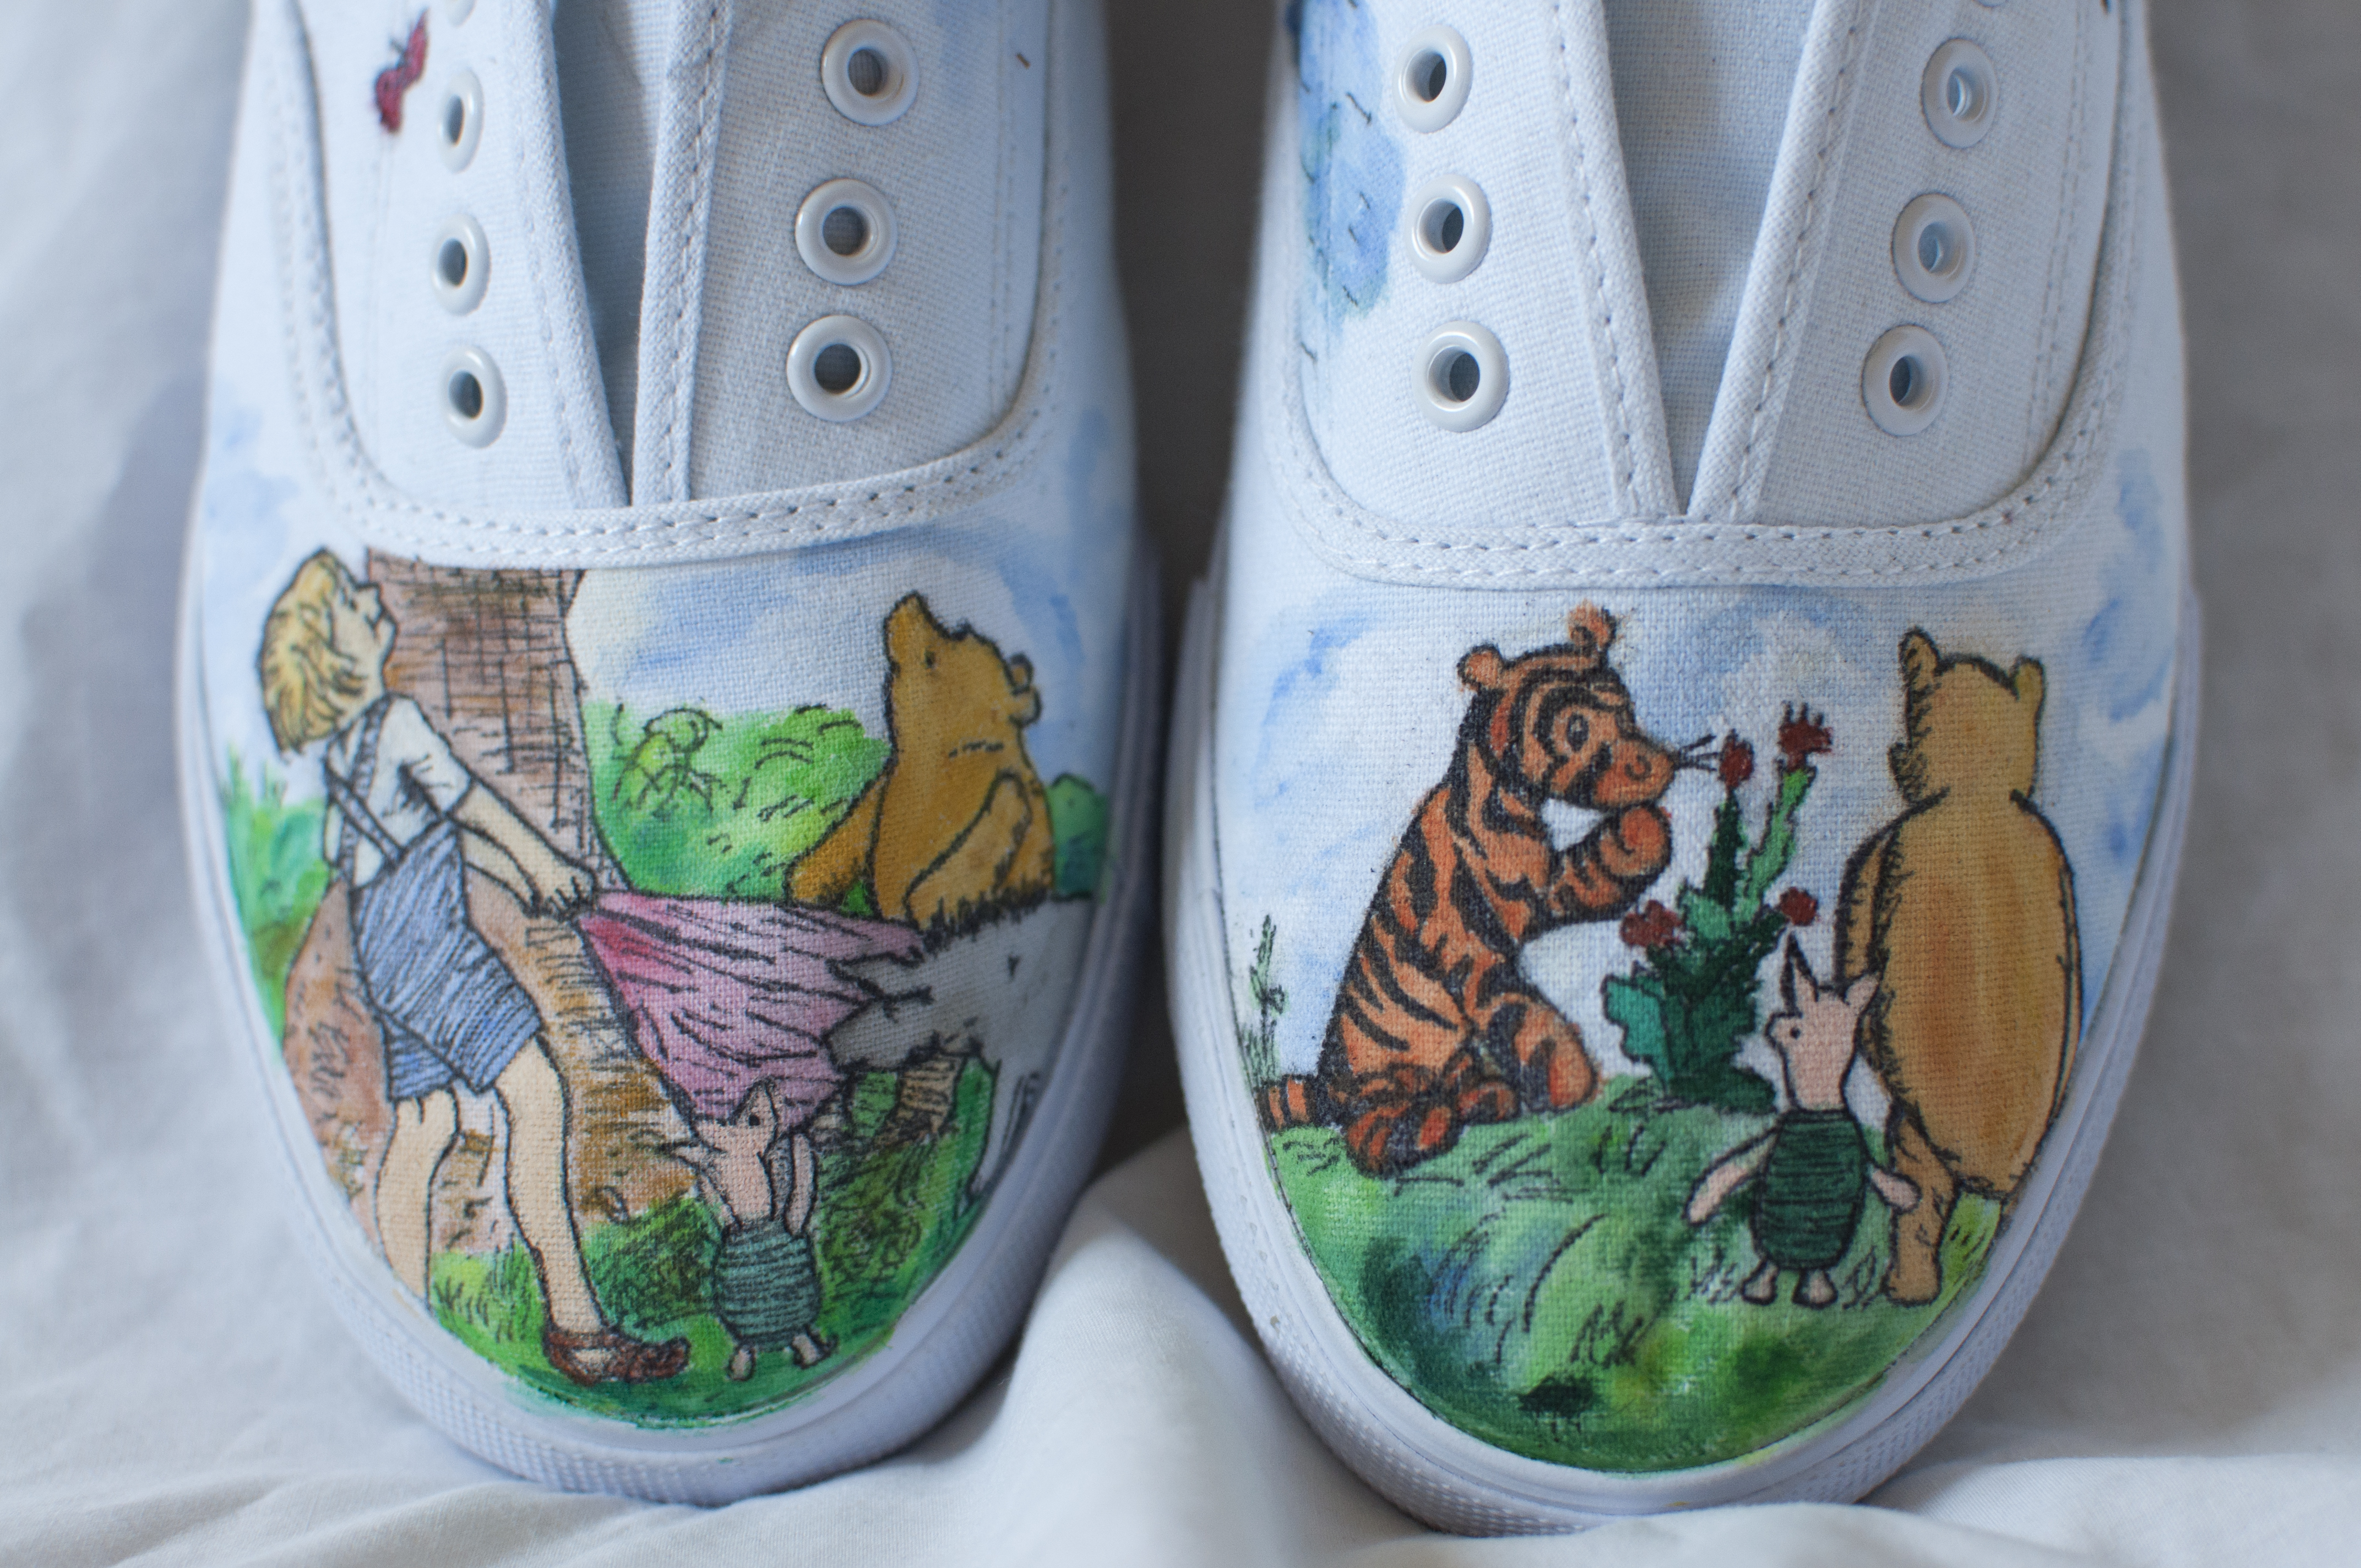 Pooh Shoes DWNLD for FULL VIEW